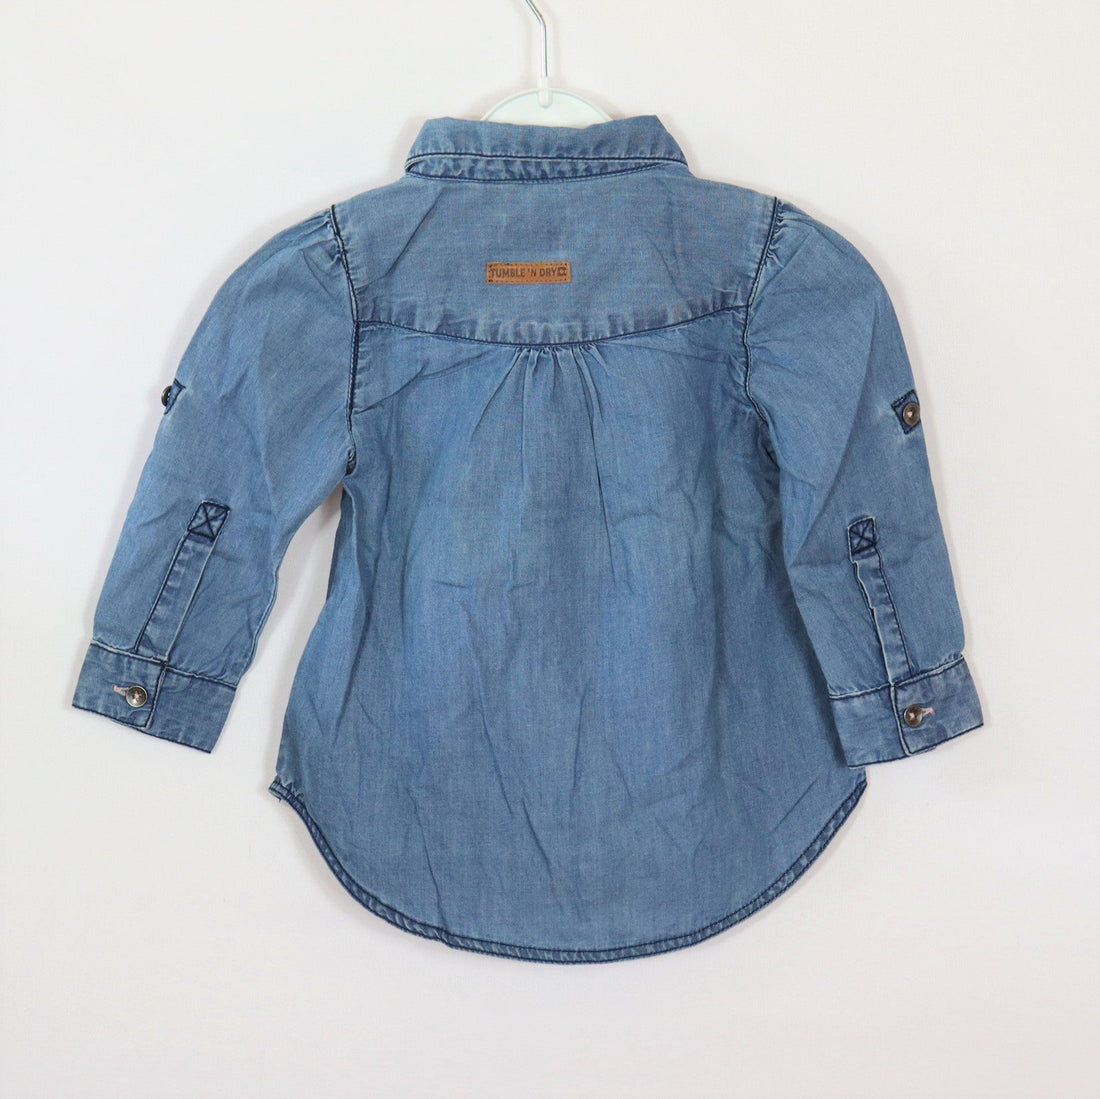 Bluse - Tumble `N Dry - 74 - blau - Jeans - sehr guter Zustand